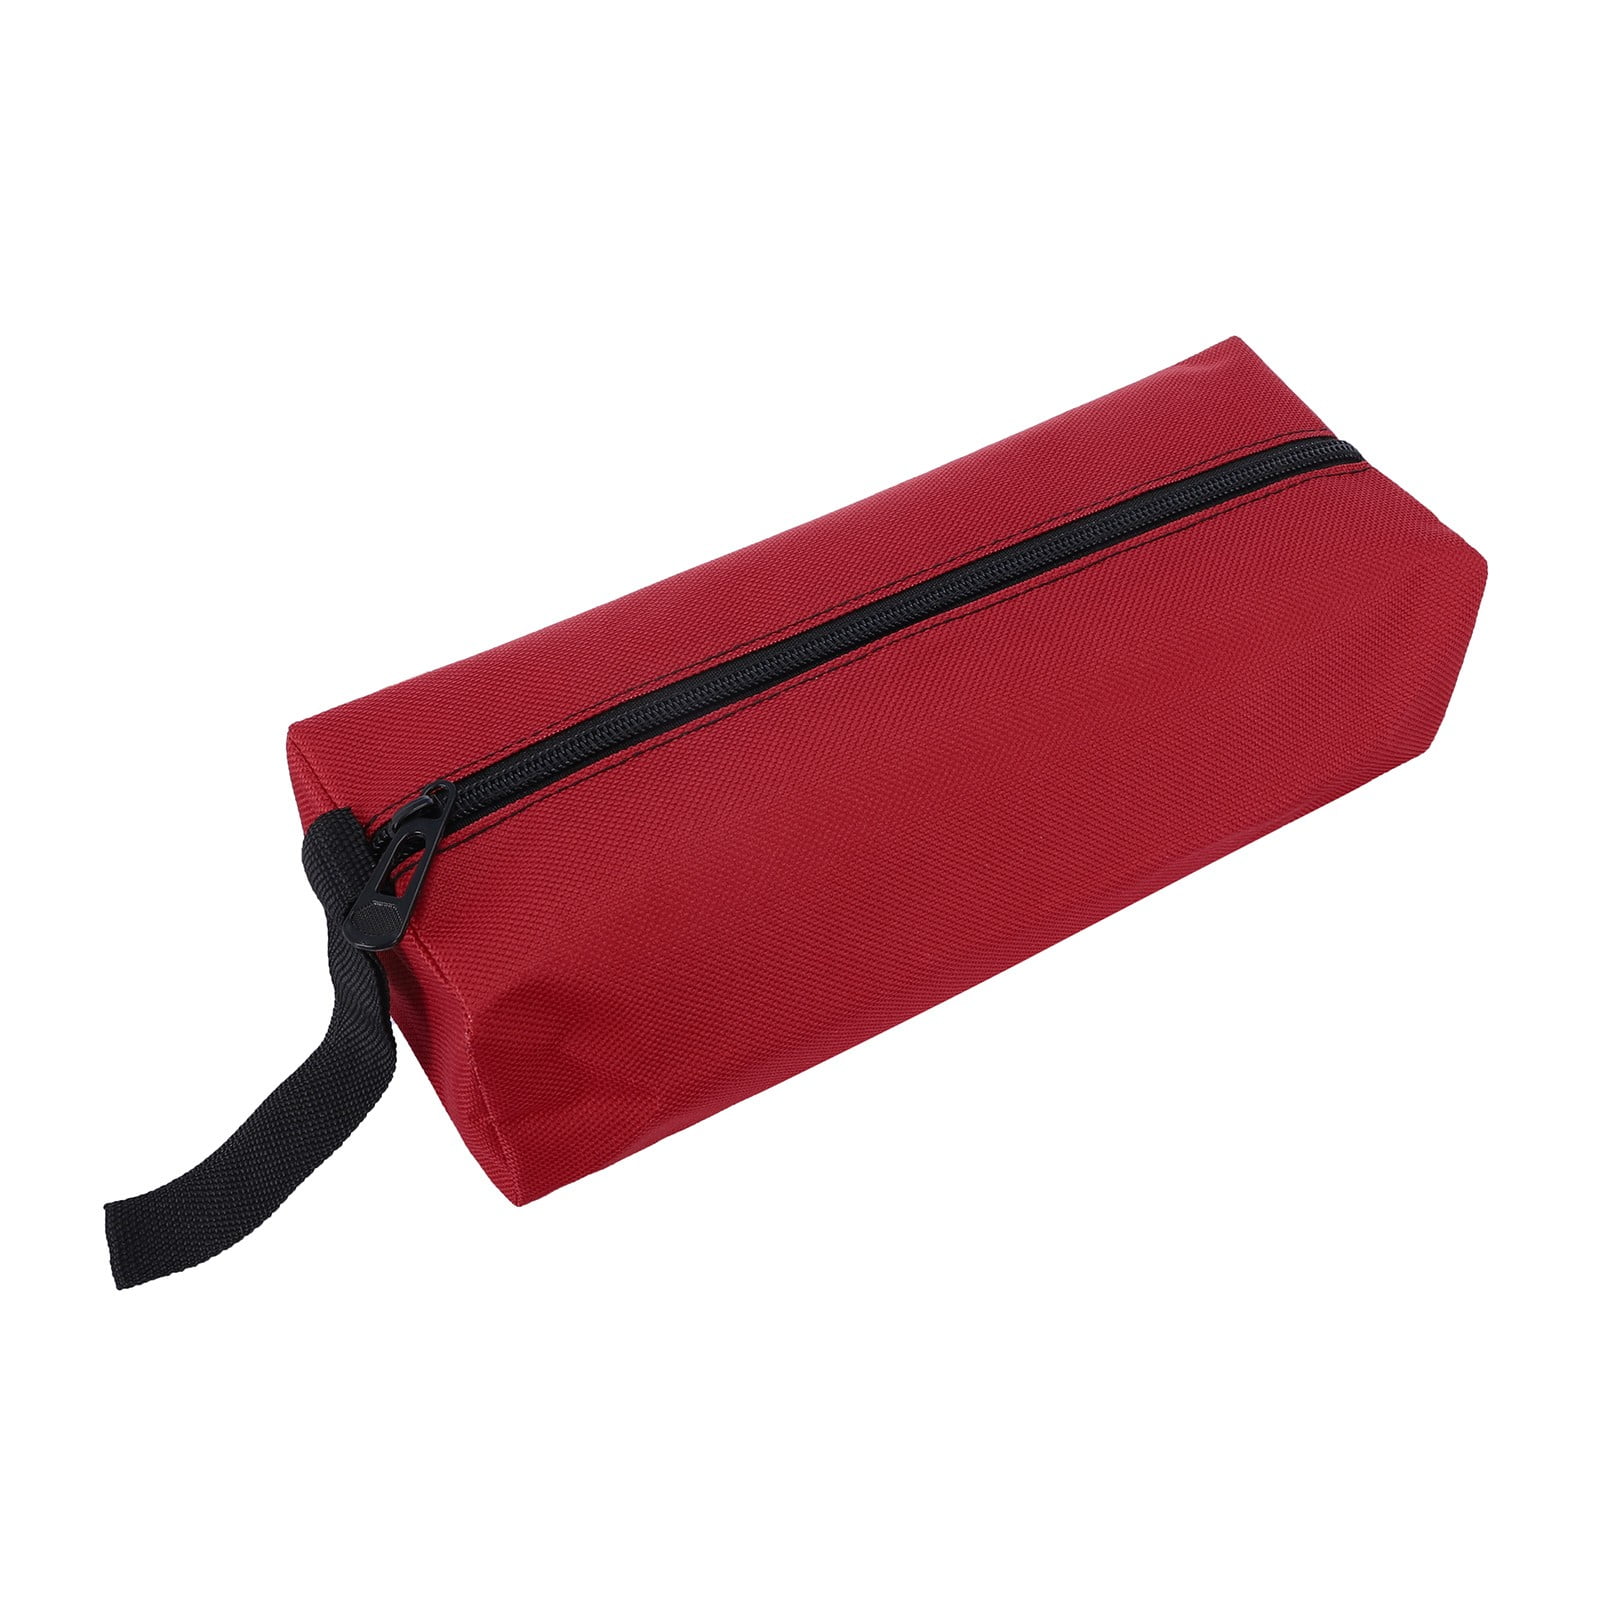 Zipper Bag Canvas Pouch Small Parts Storage Plumber Electrician Hand Tool 